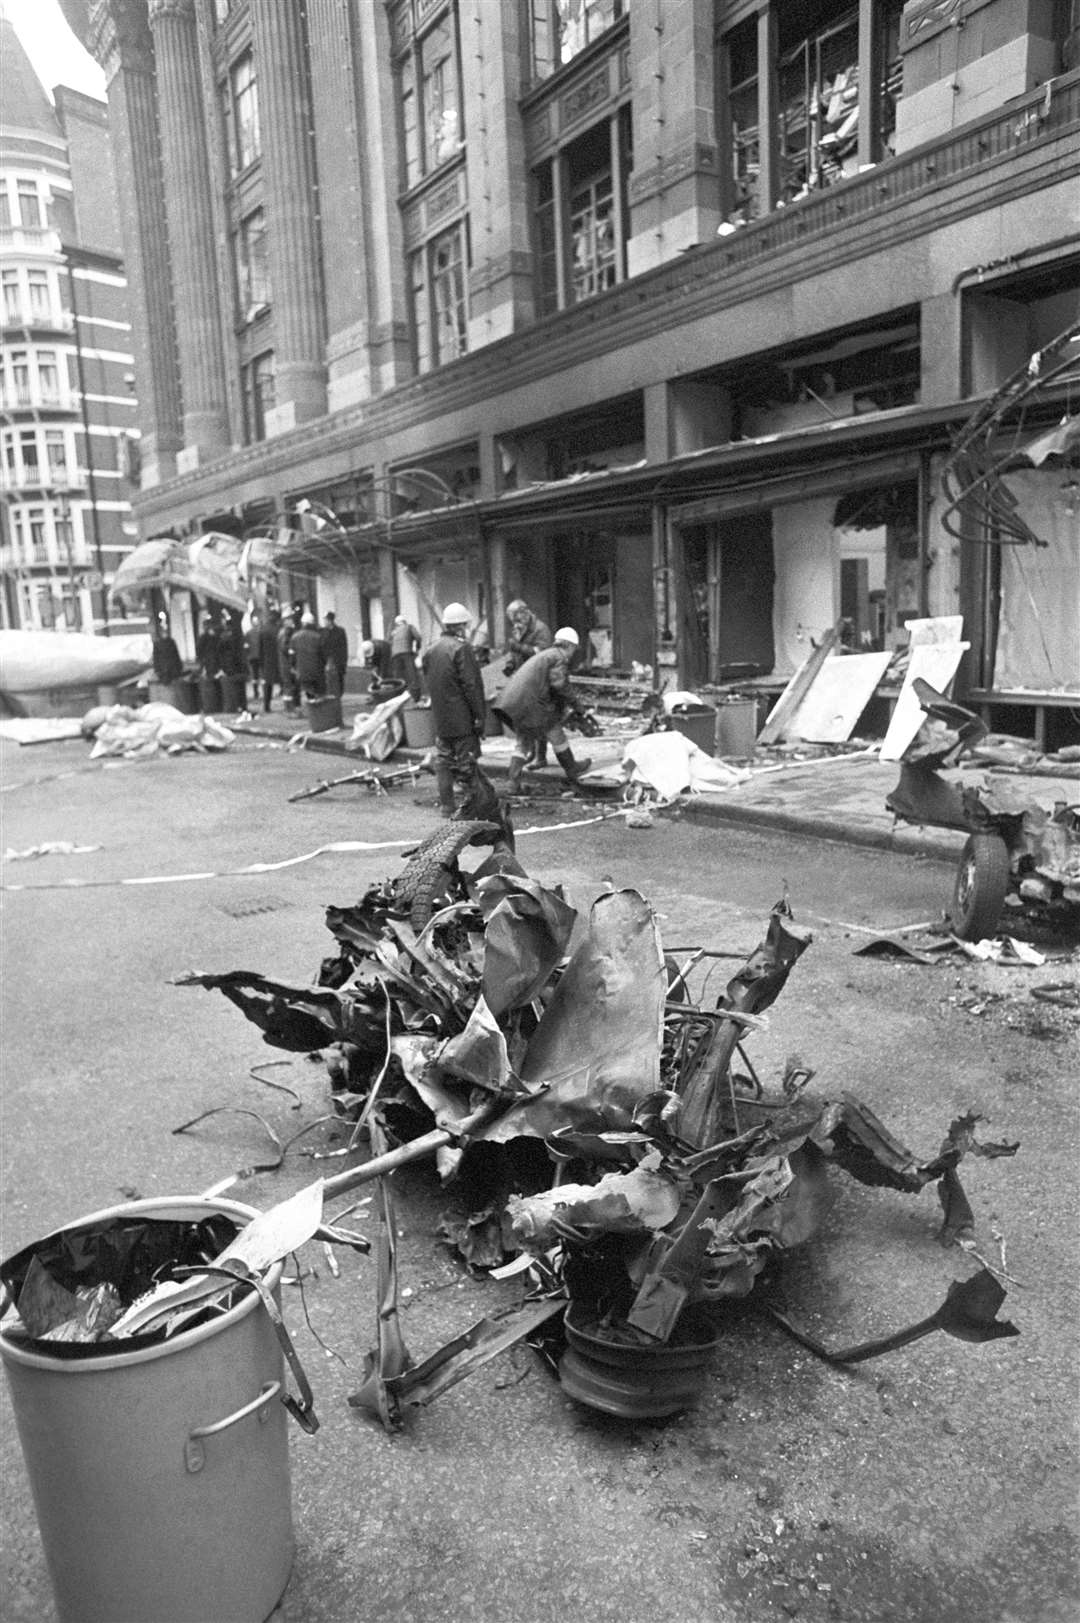 The remains of the Austin 1100 used in the car bomb attack (PA)